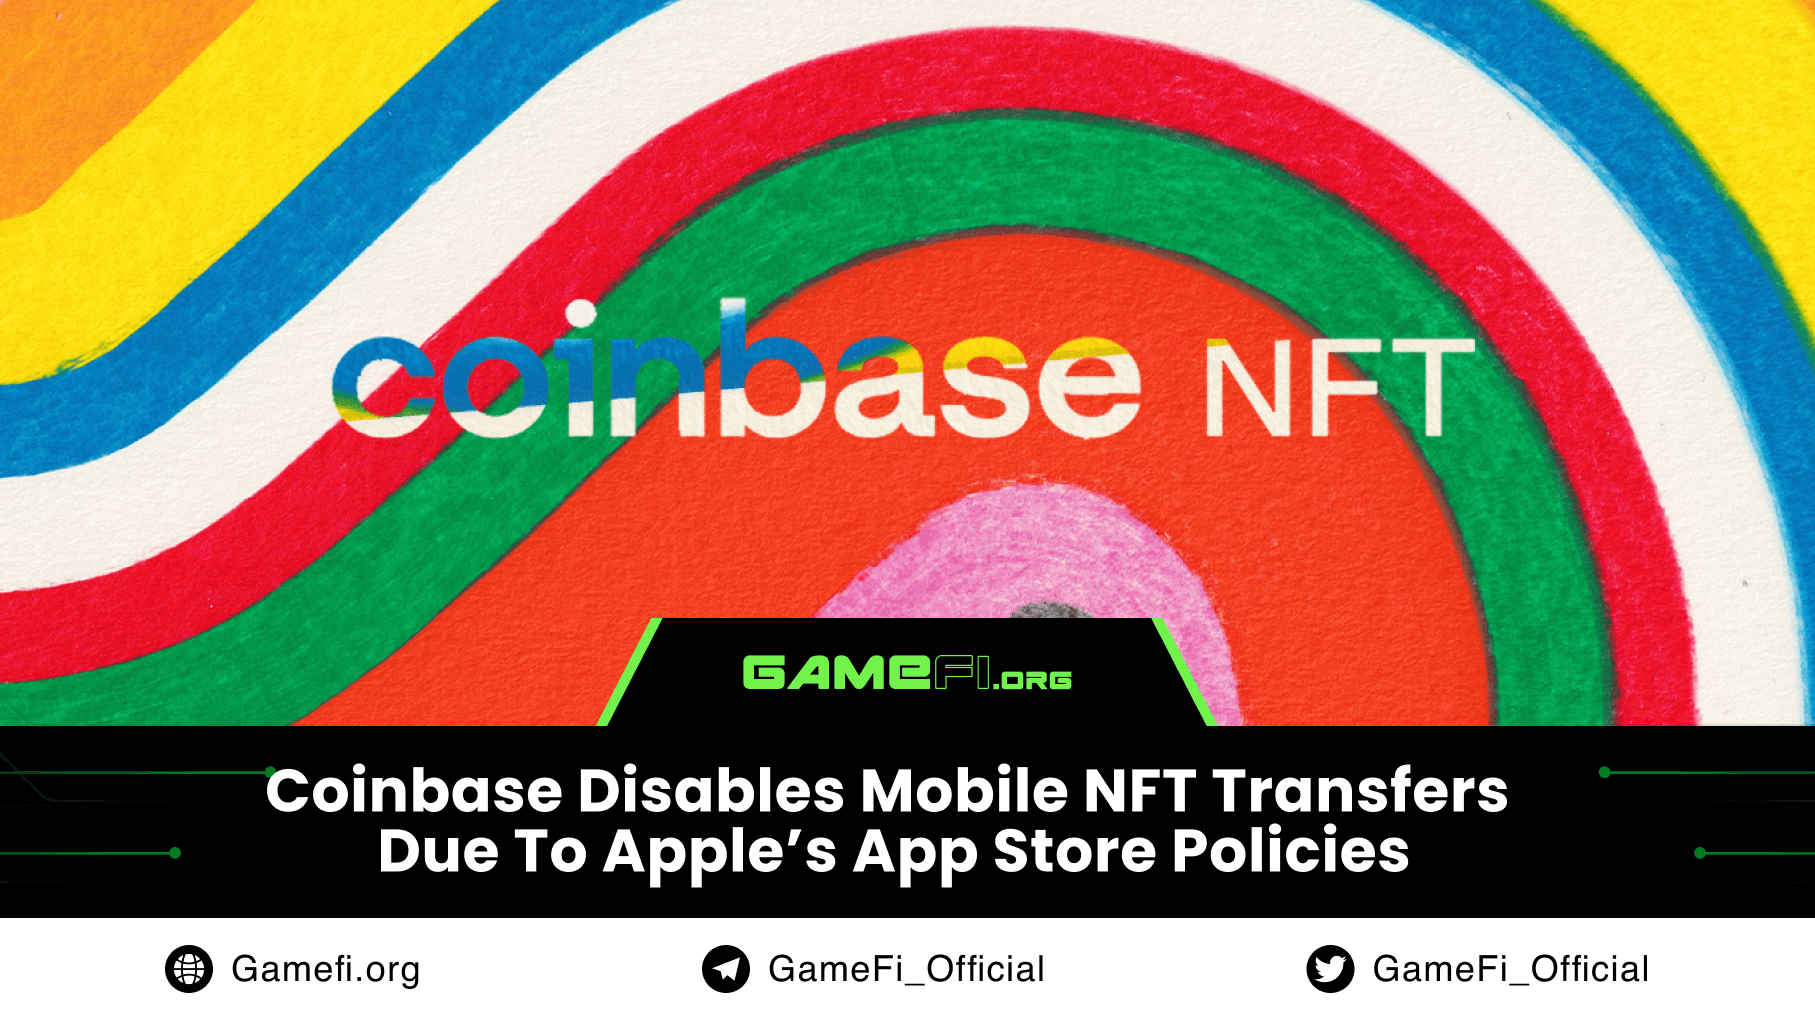 Coinbase Disables Mobile NFT Transfers Due to Apple’s App Store Policies